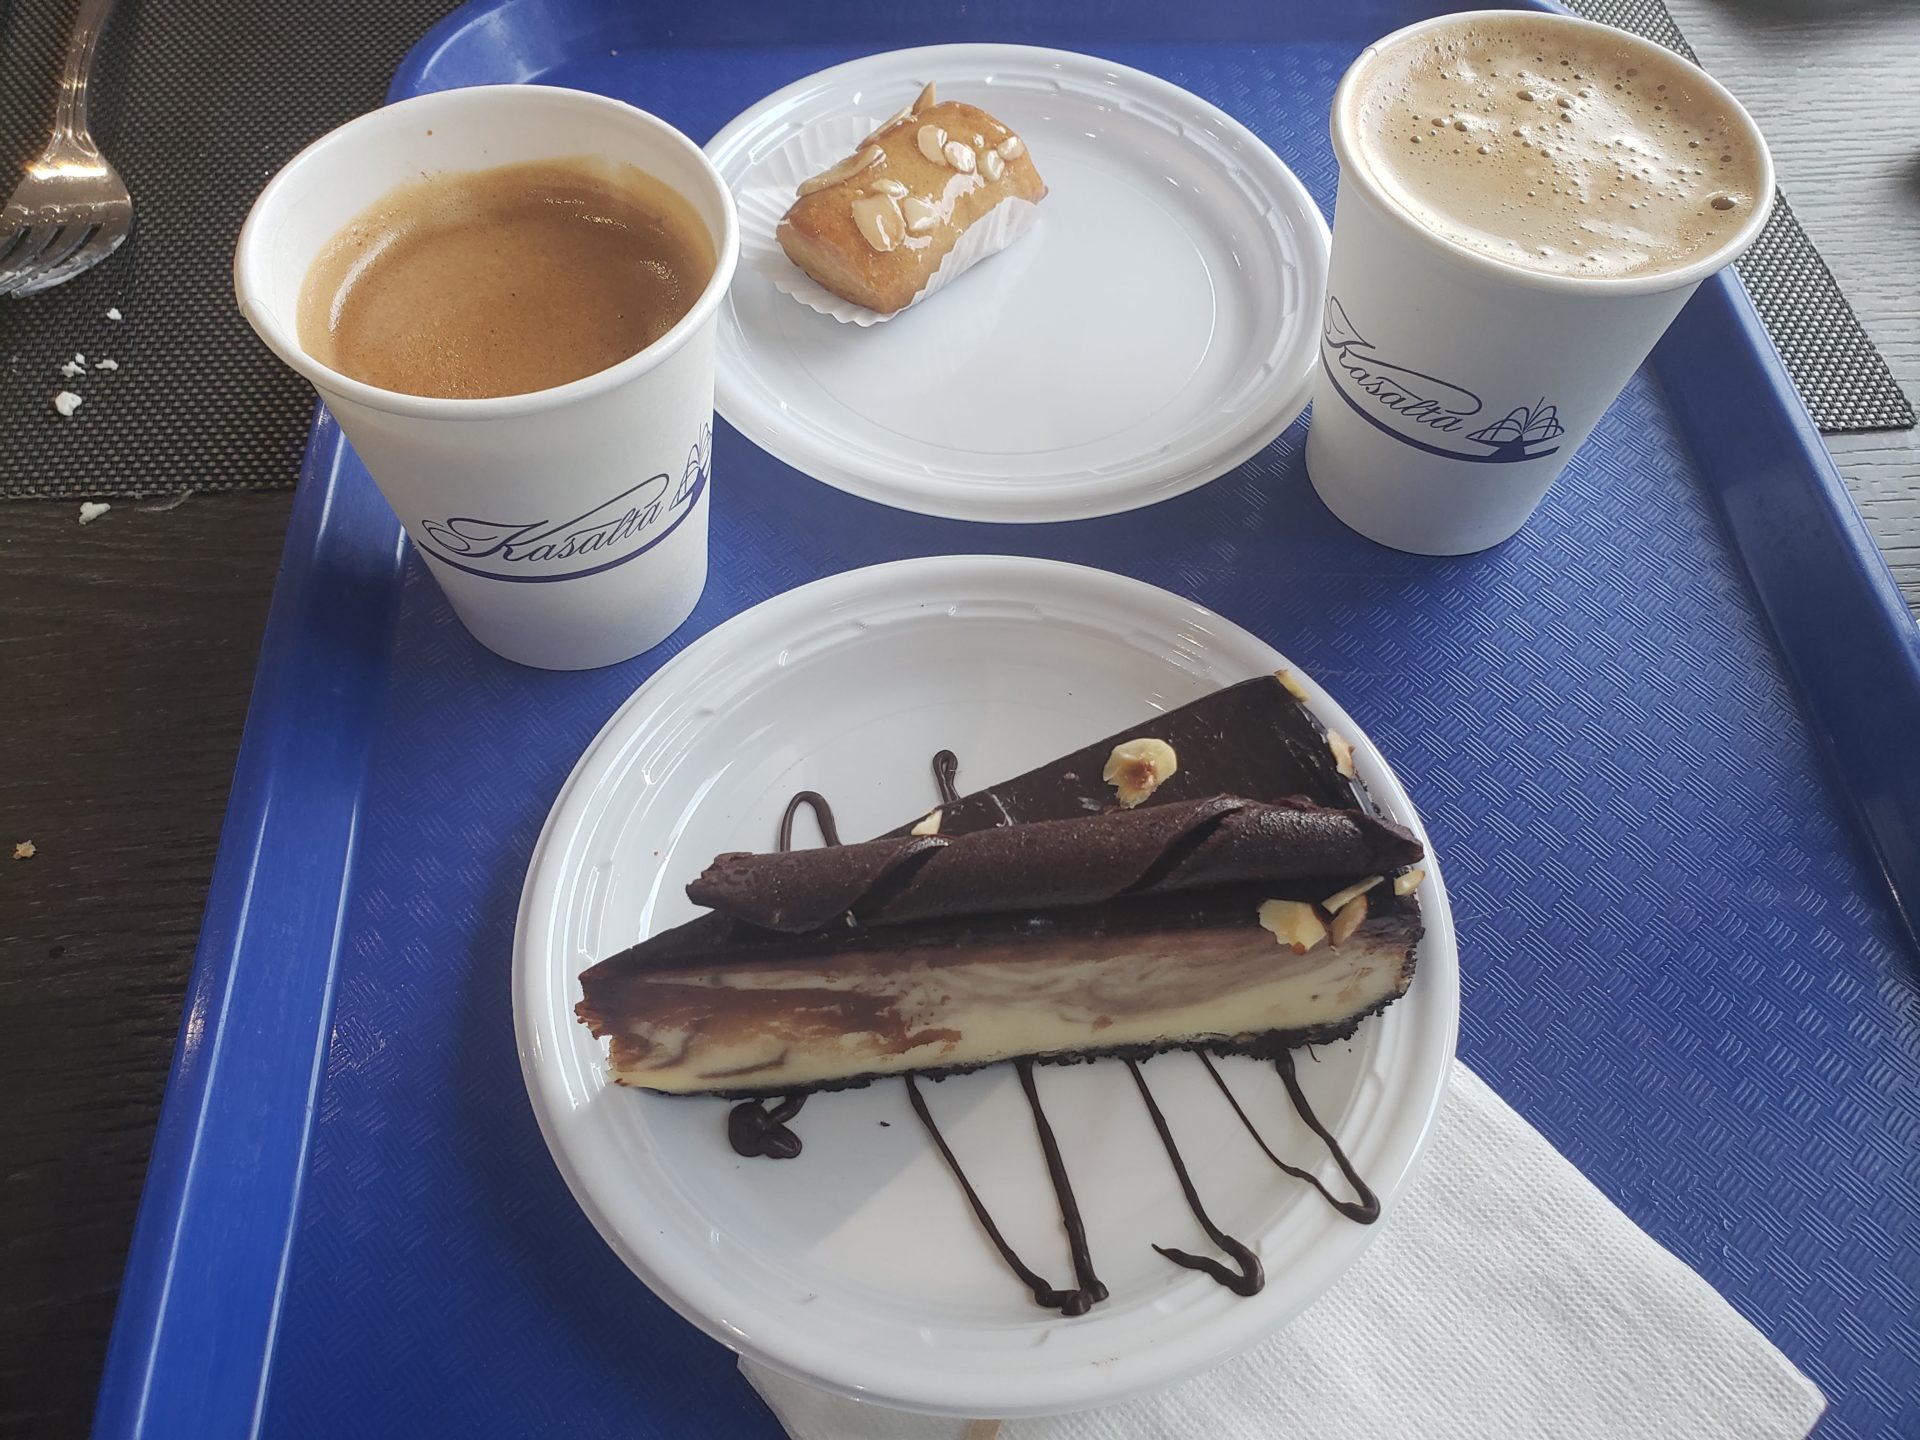 a plate of dessert and coffee on a tray